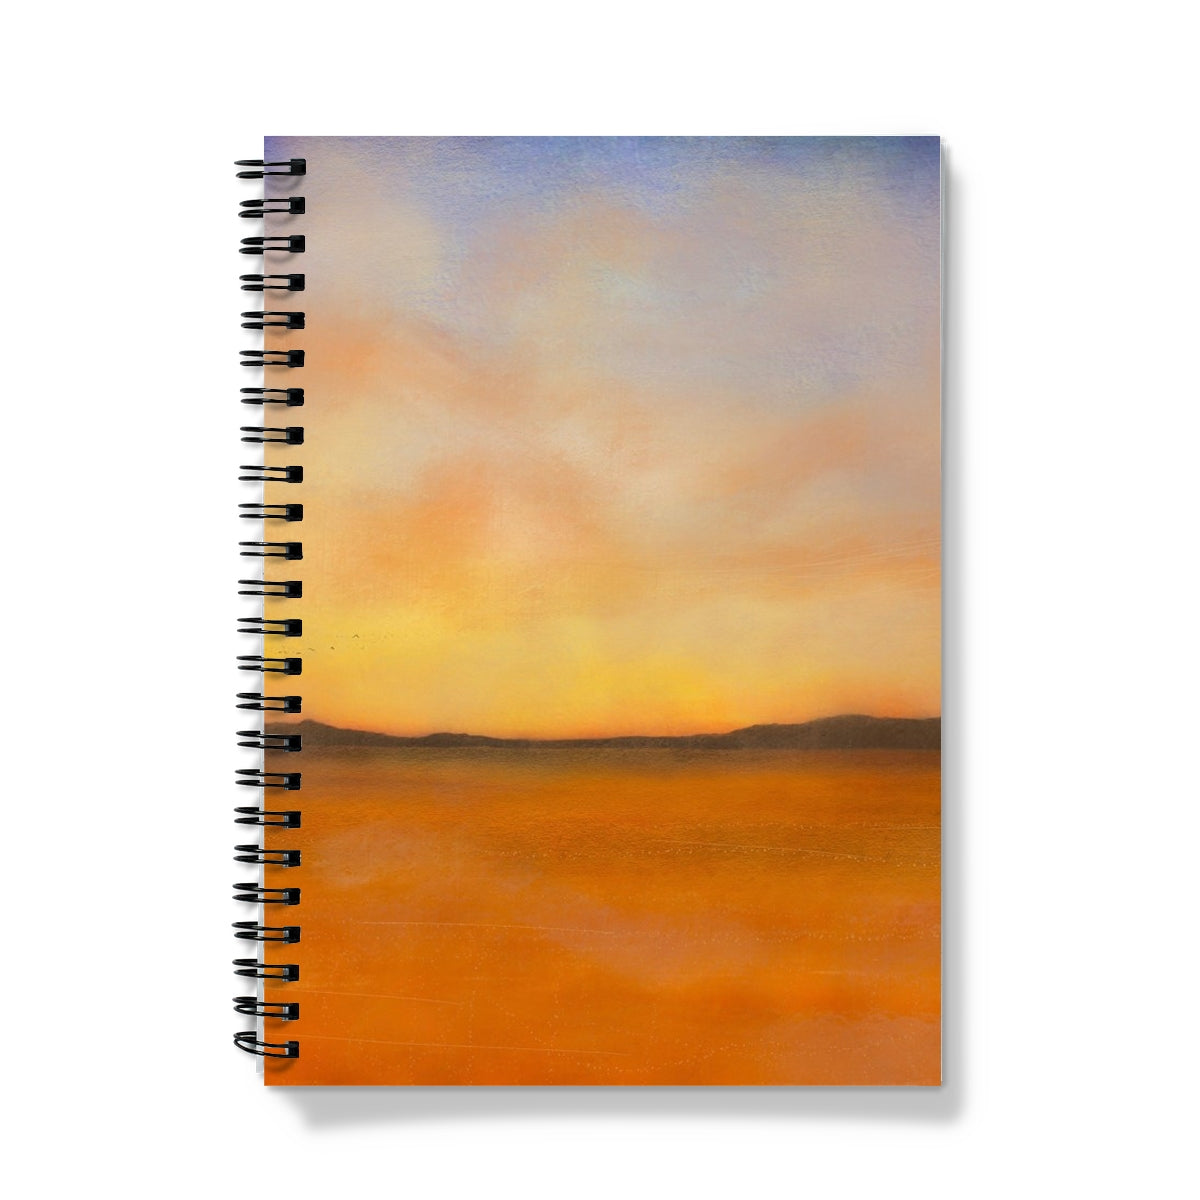 Islay Dawn Art Gifts Notebook-Journals & Notebooks-Hebridean Islands Art Gallery-A5-Graph-Paintings, Prints, Homeware, Art Gifts From Scotland By Scottish Artist Kevin Hunter